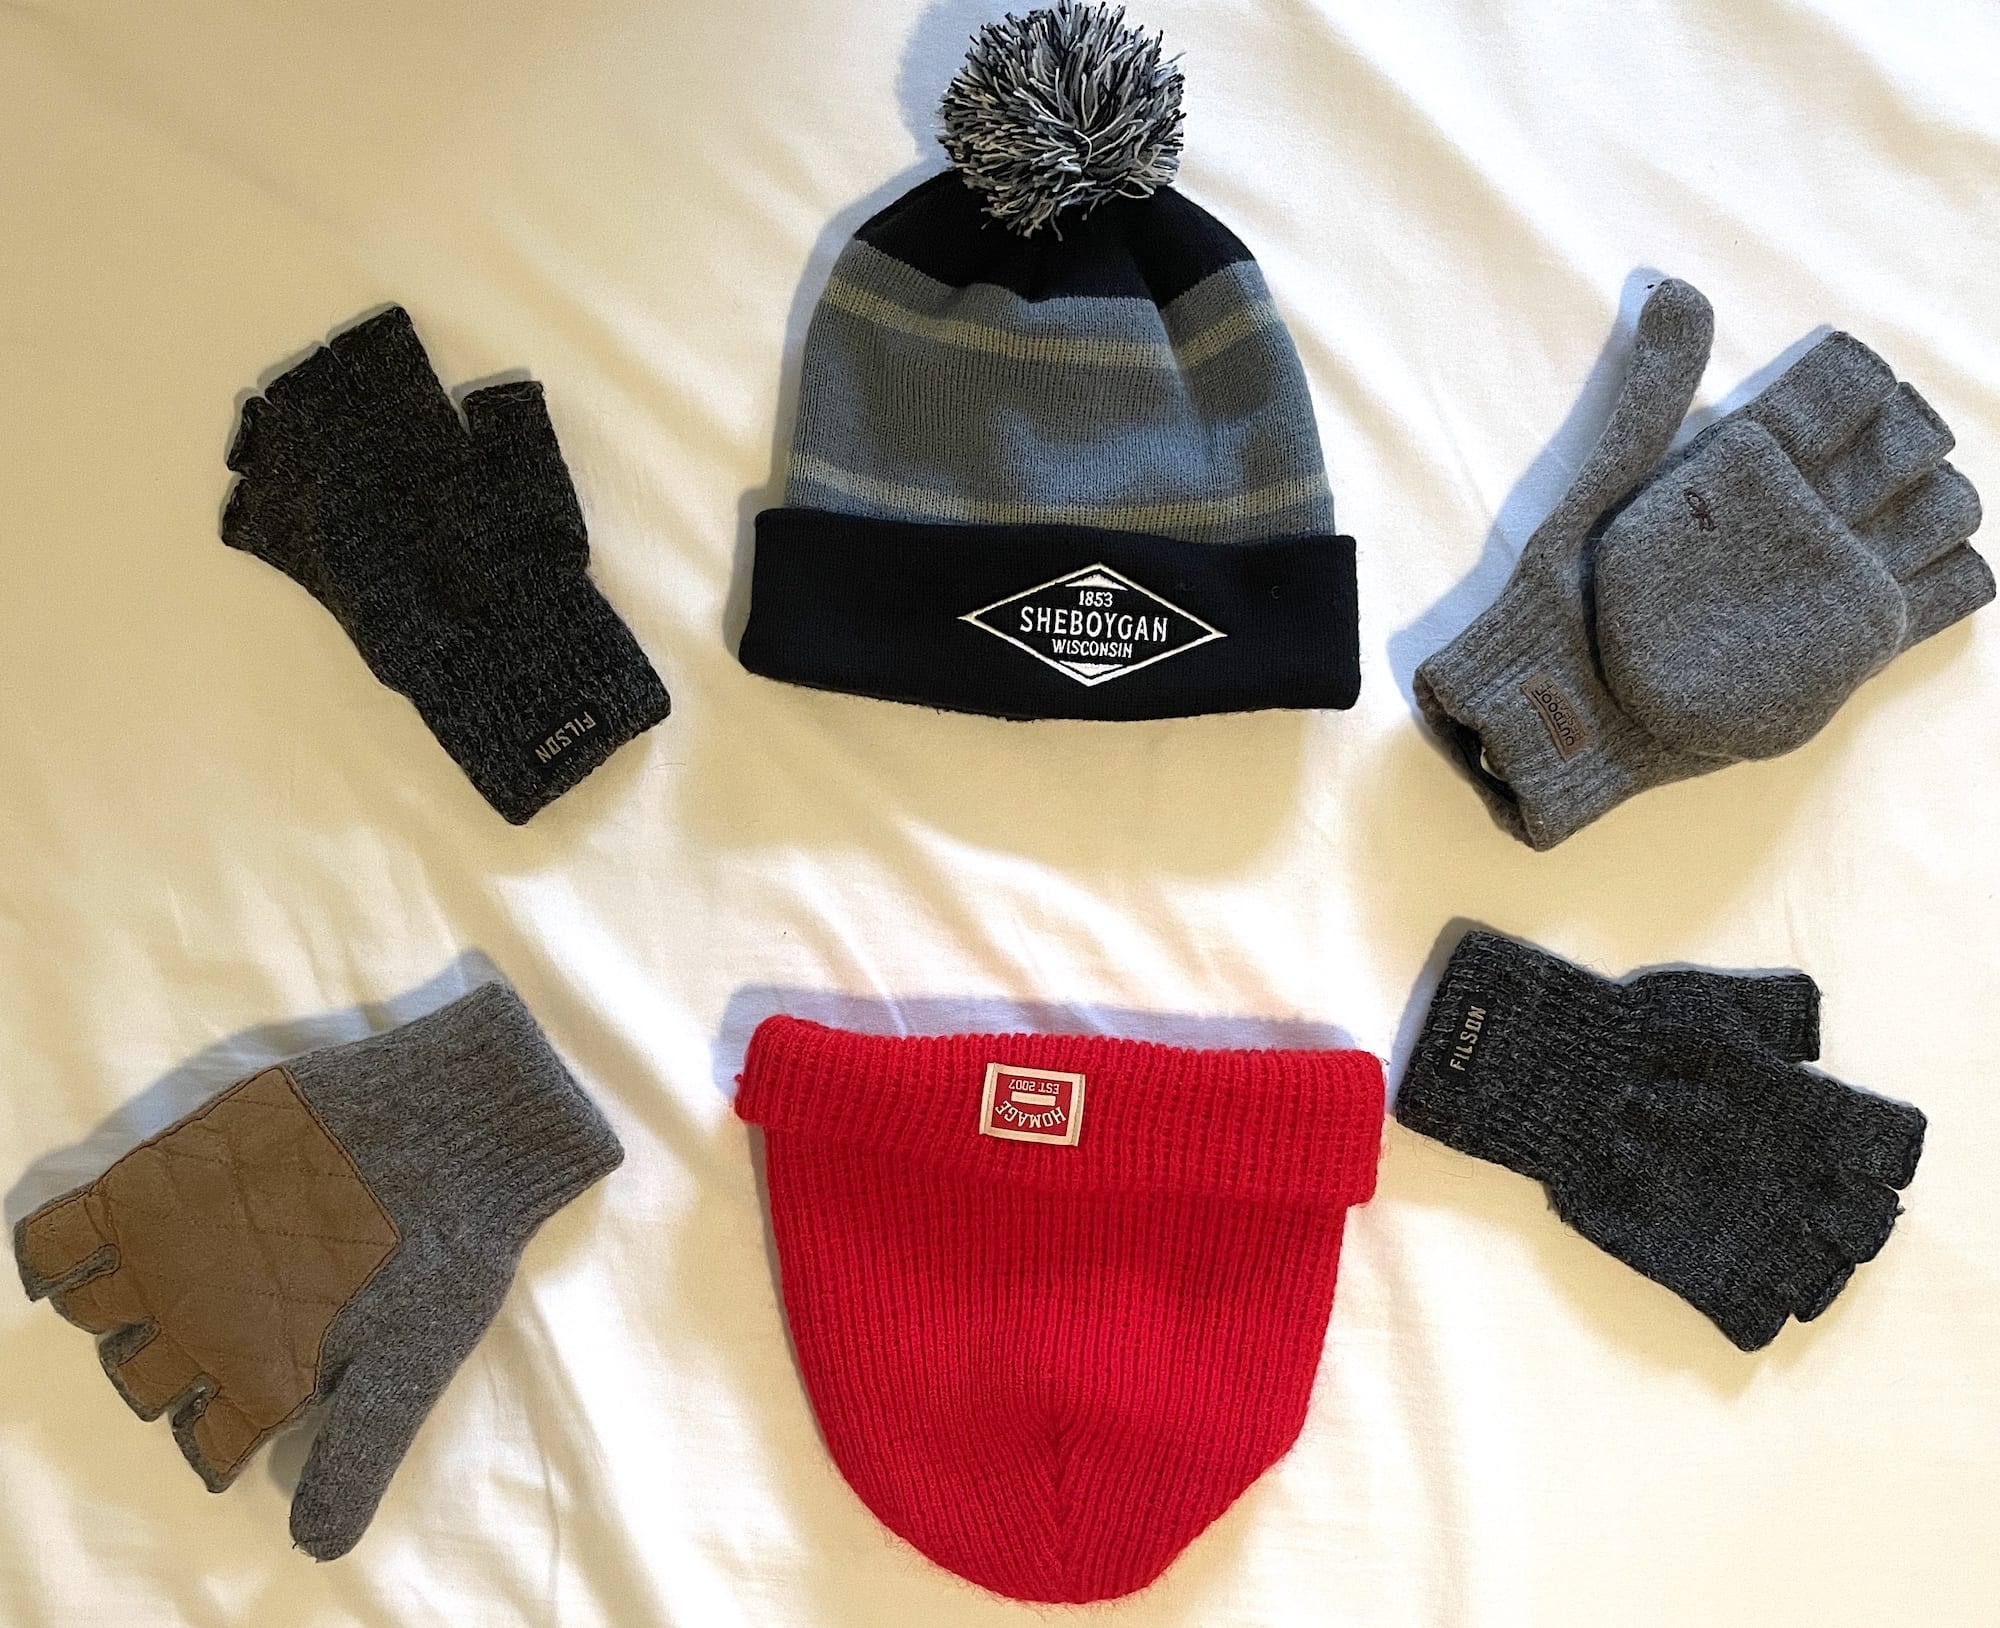 Hats and gloves come in a variety of materials and weight, perfect for all kinds of weather 